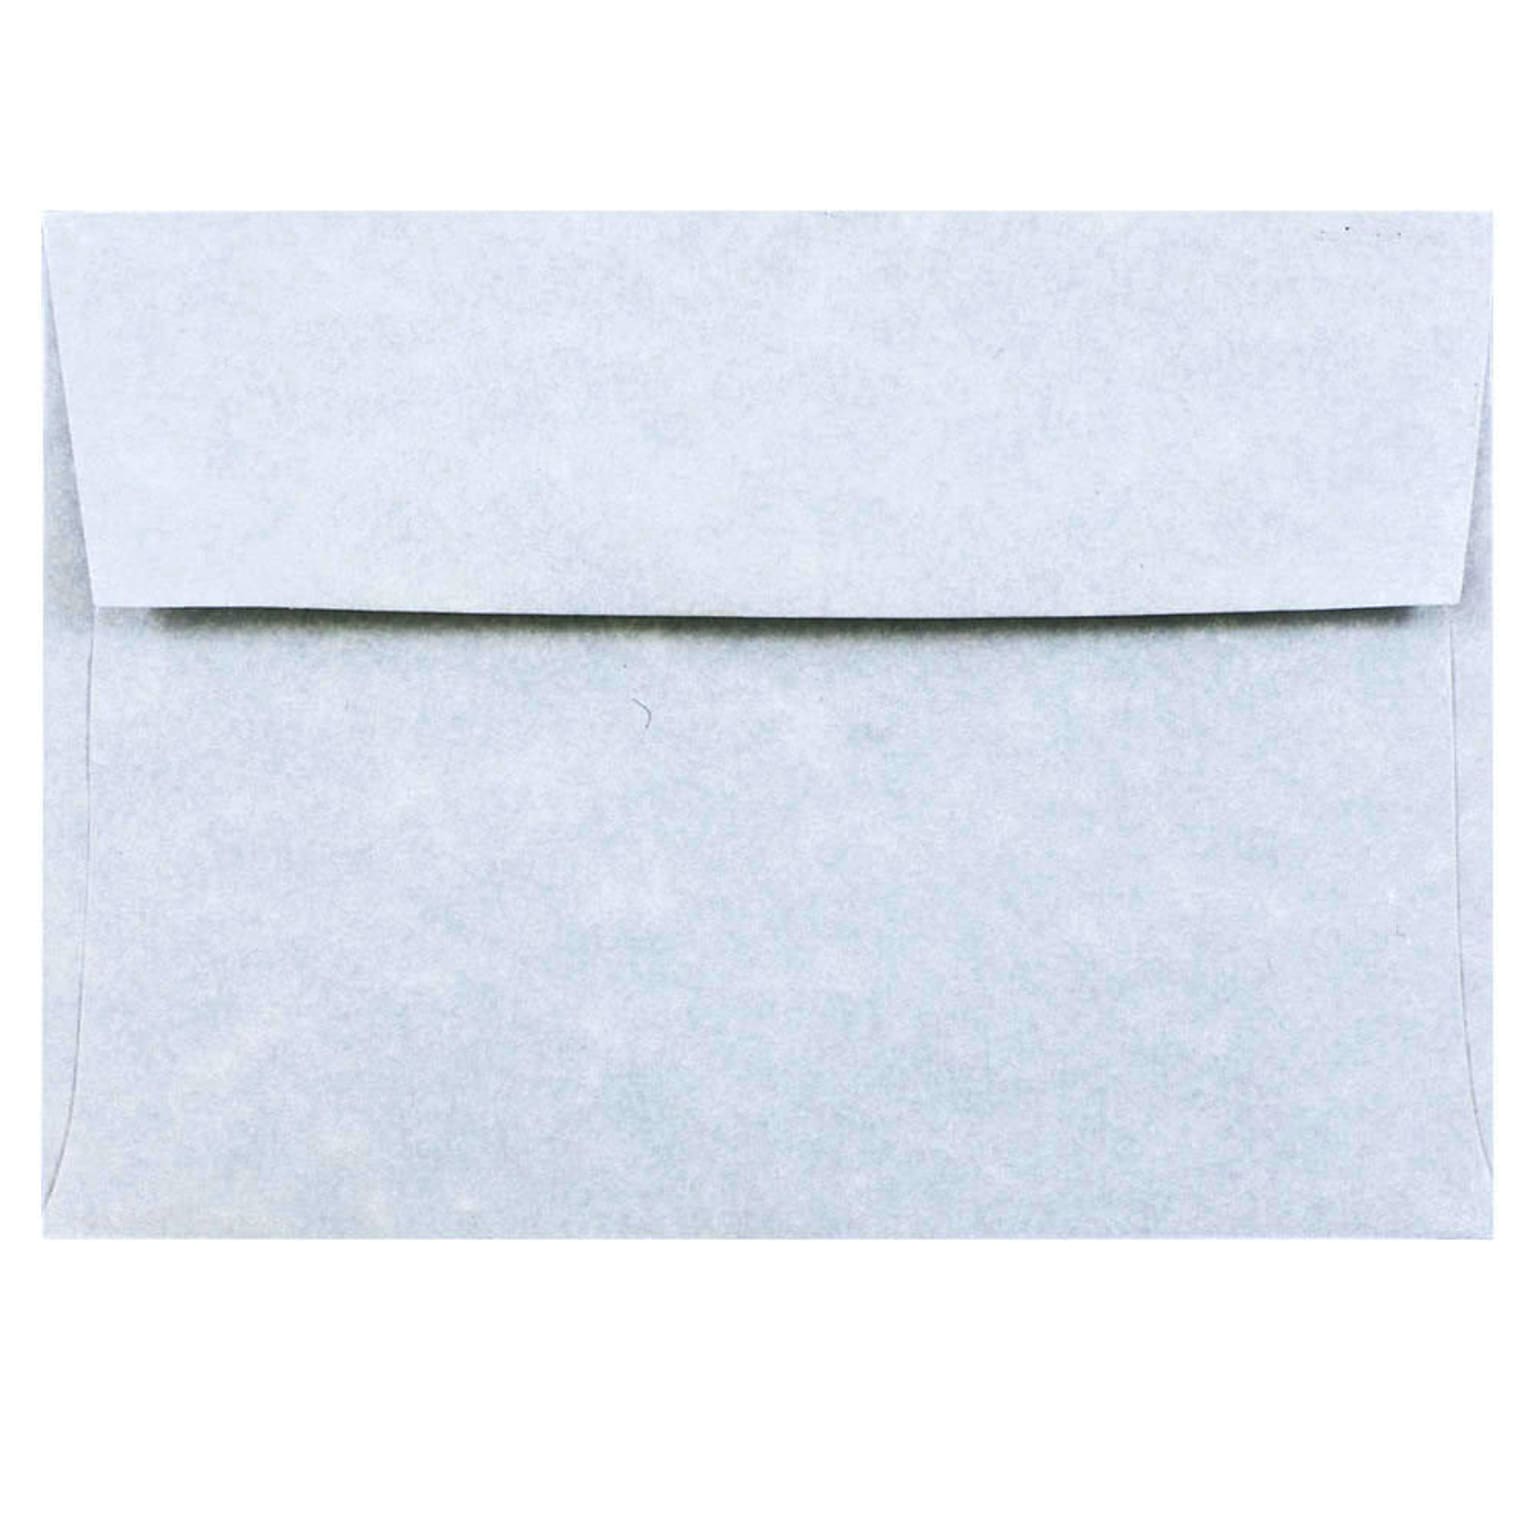 JAM Paper 4Bar A1 Parchment Invitation Envelopes, 3.625 x 5.125, Blue Recycled, 50/Pack (900877844I)